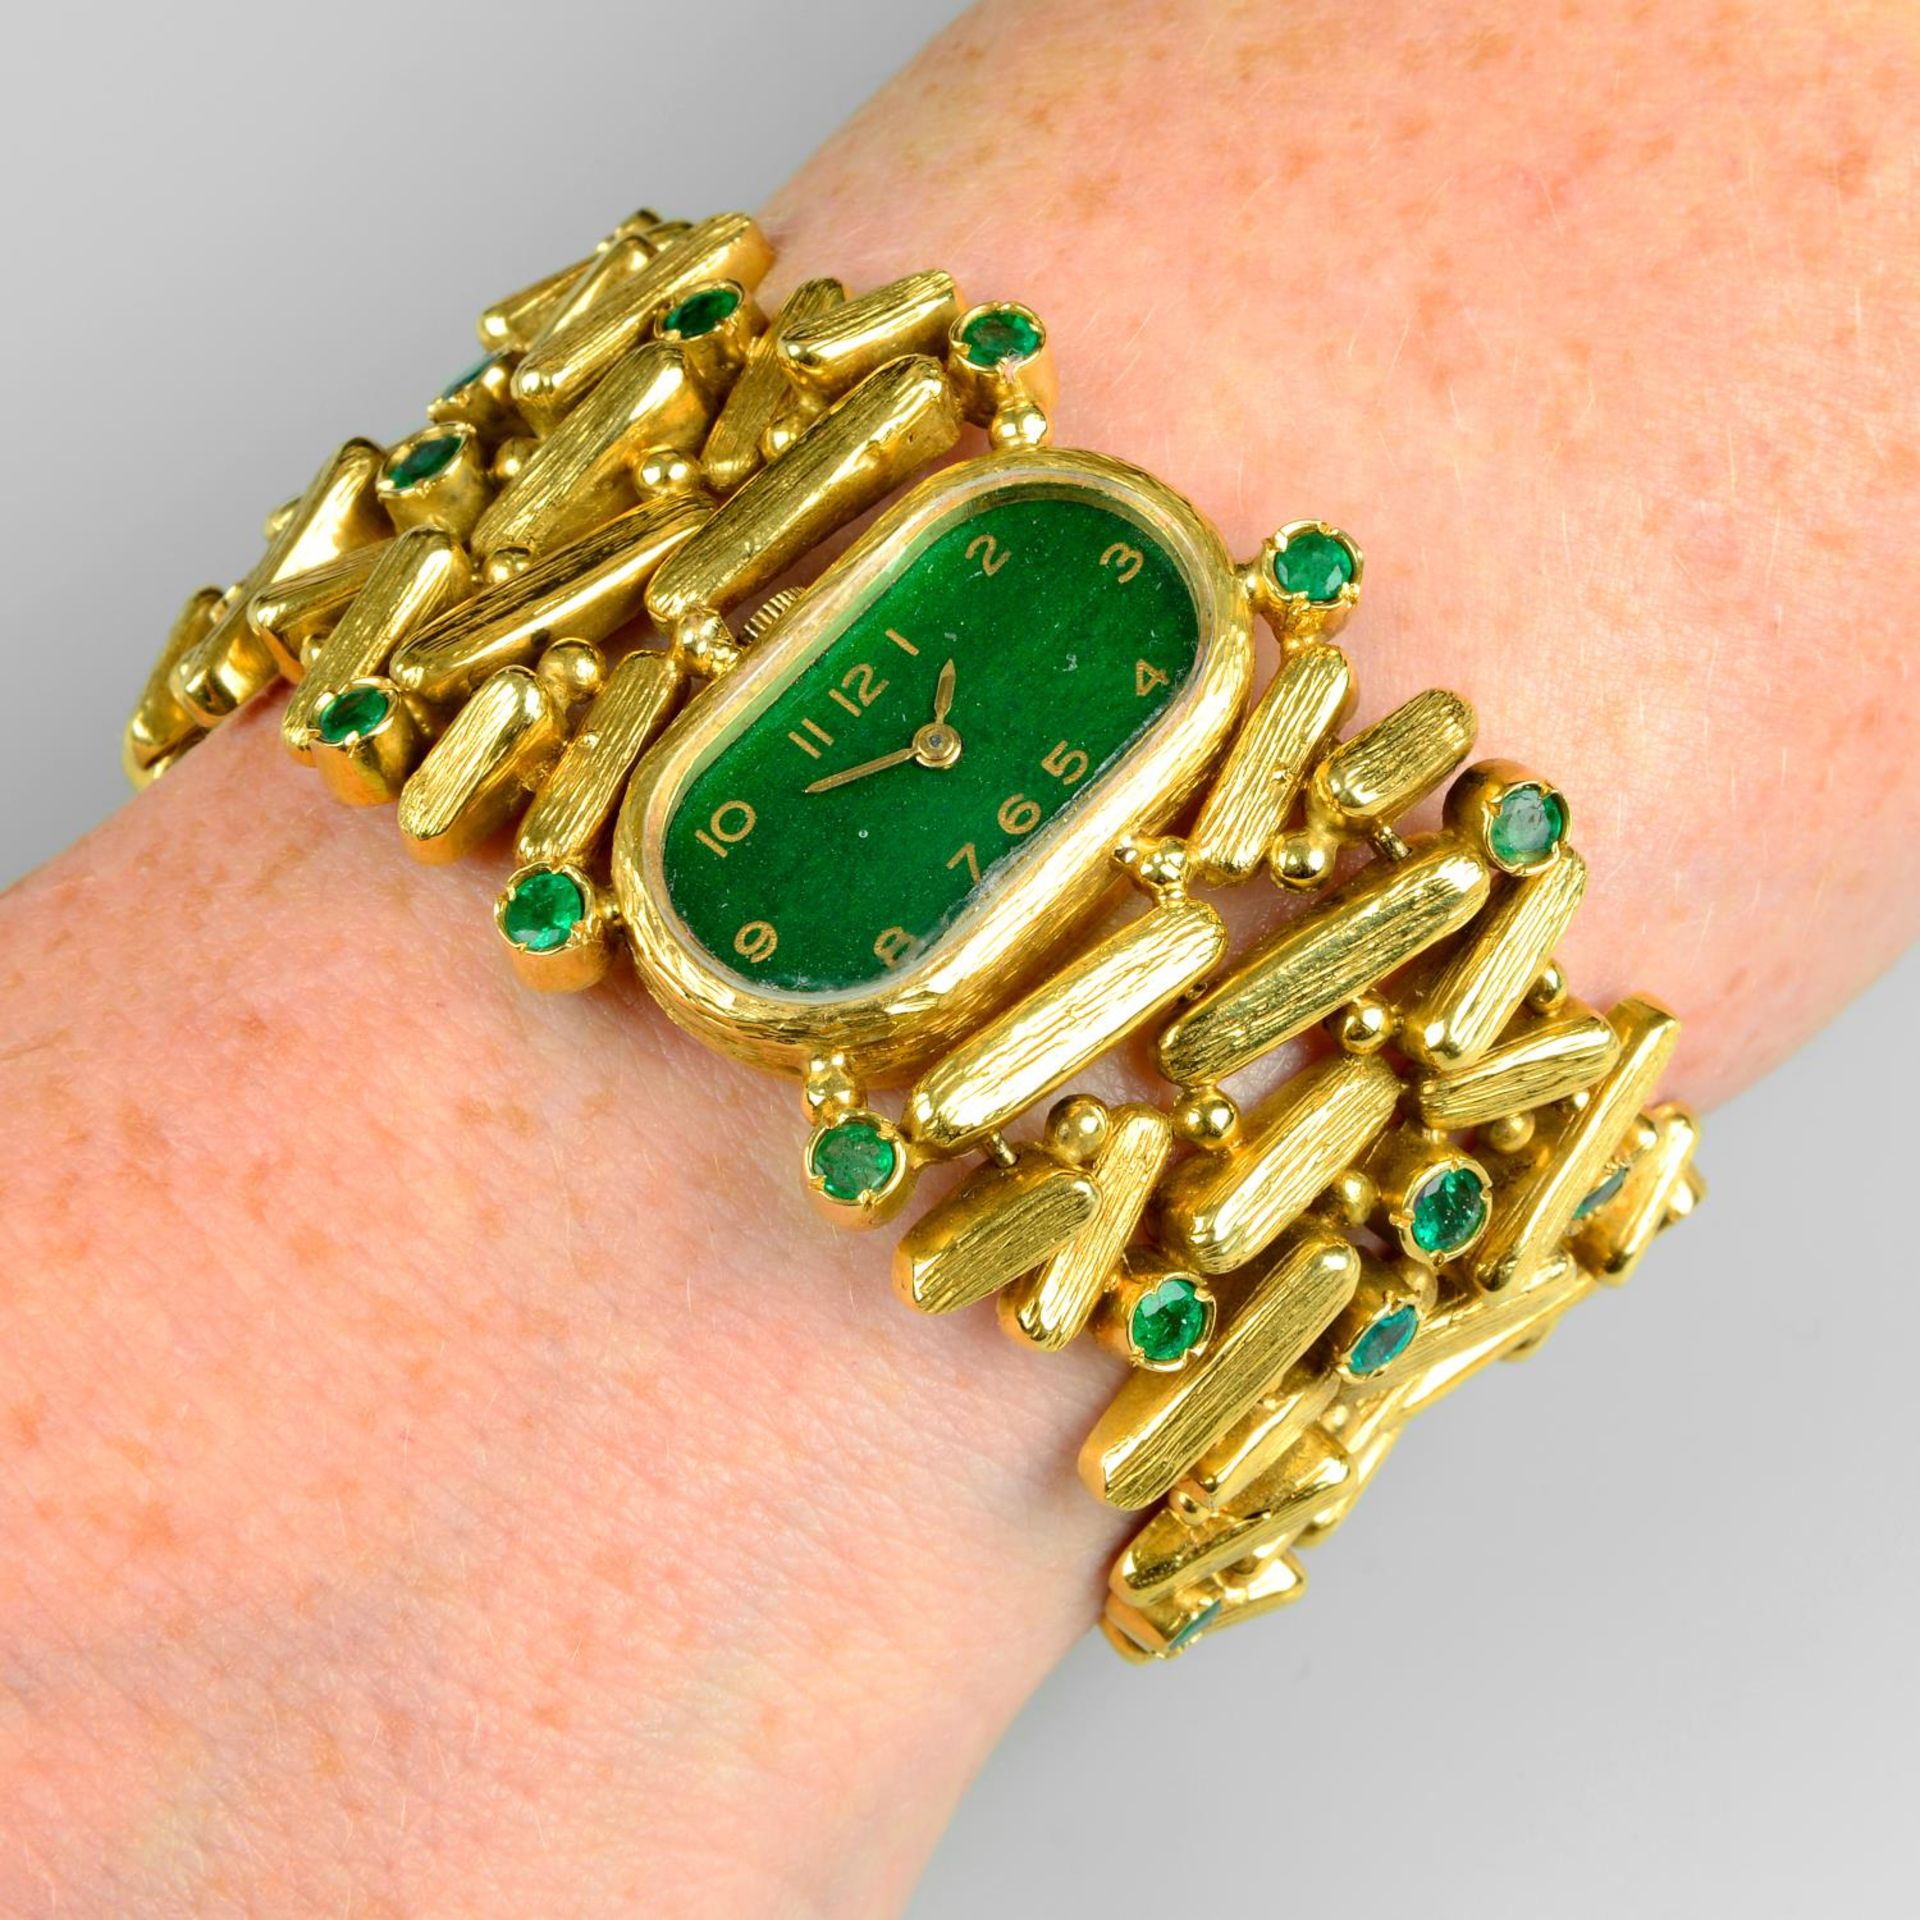 A 1970s 18ct gold emerald cocktail watch, with painted green dial.Maker's mark PG.